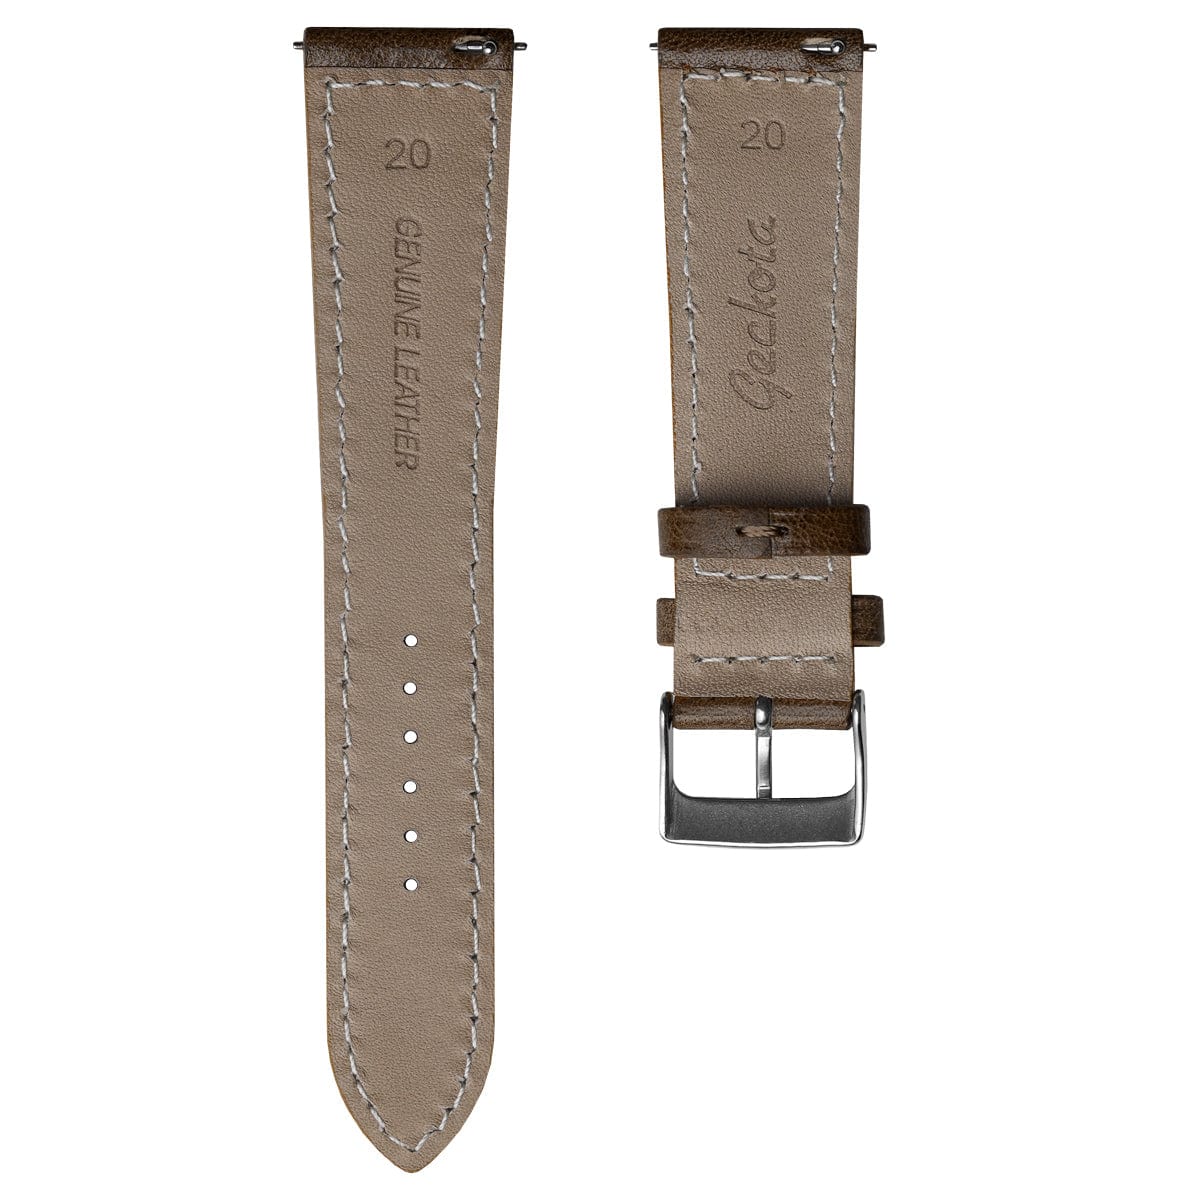 22mm Dark Brown Genuine Leather Watchband | Heavy Grain, Medium Padded  Replacement Wrist Watchstrap with Creamy White Stitches that brings New  Life to